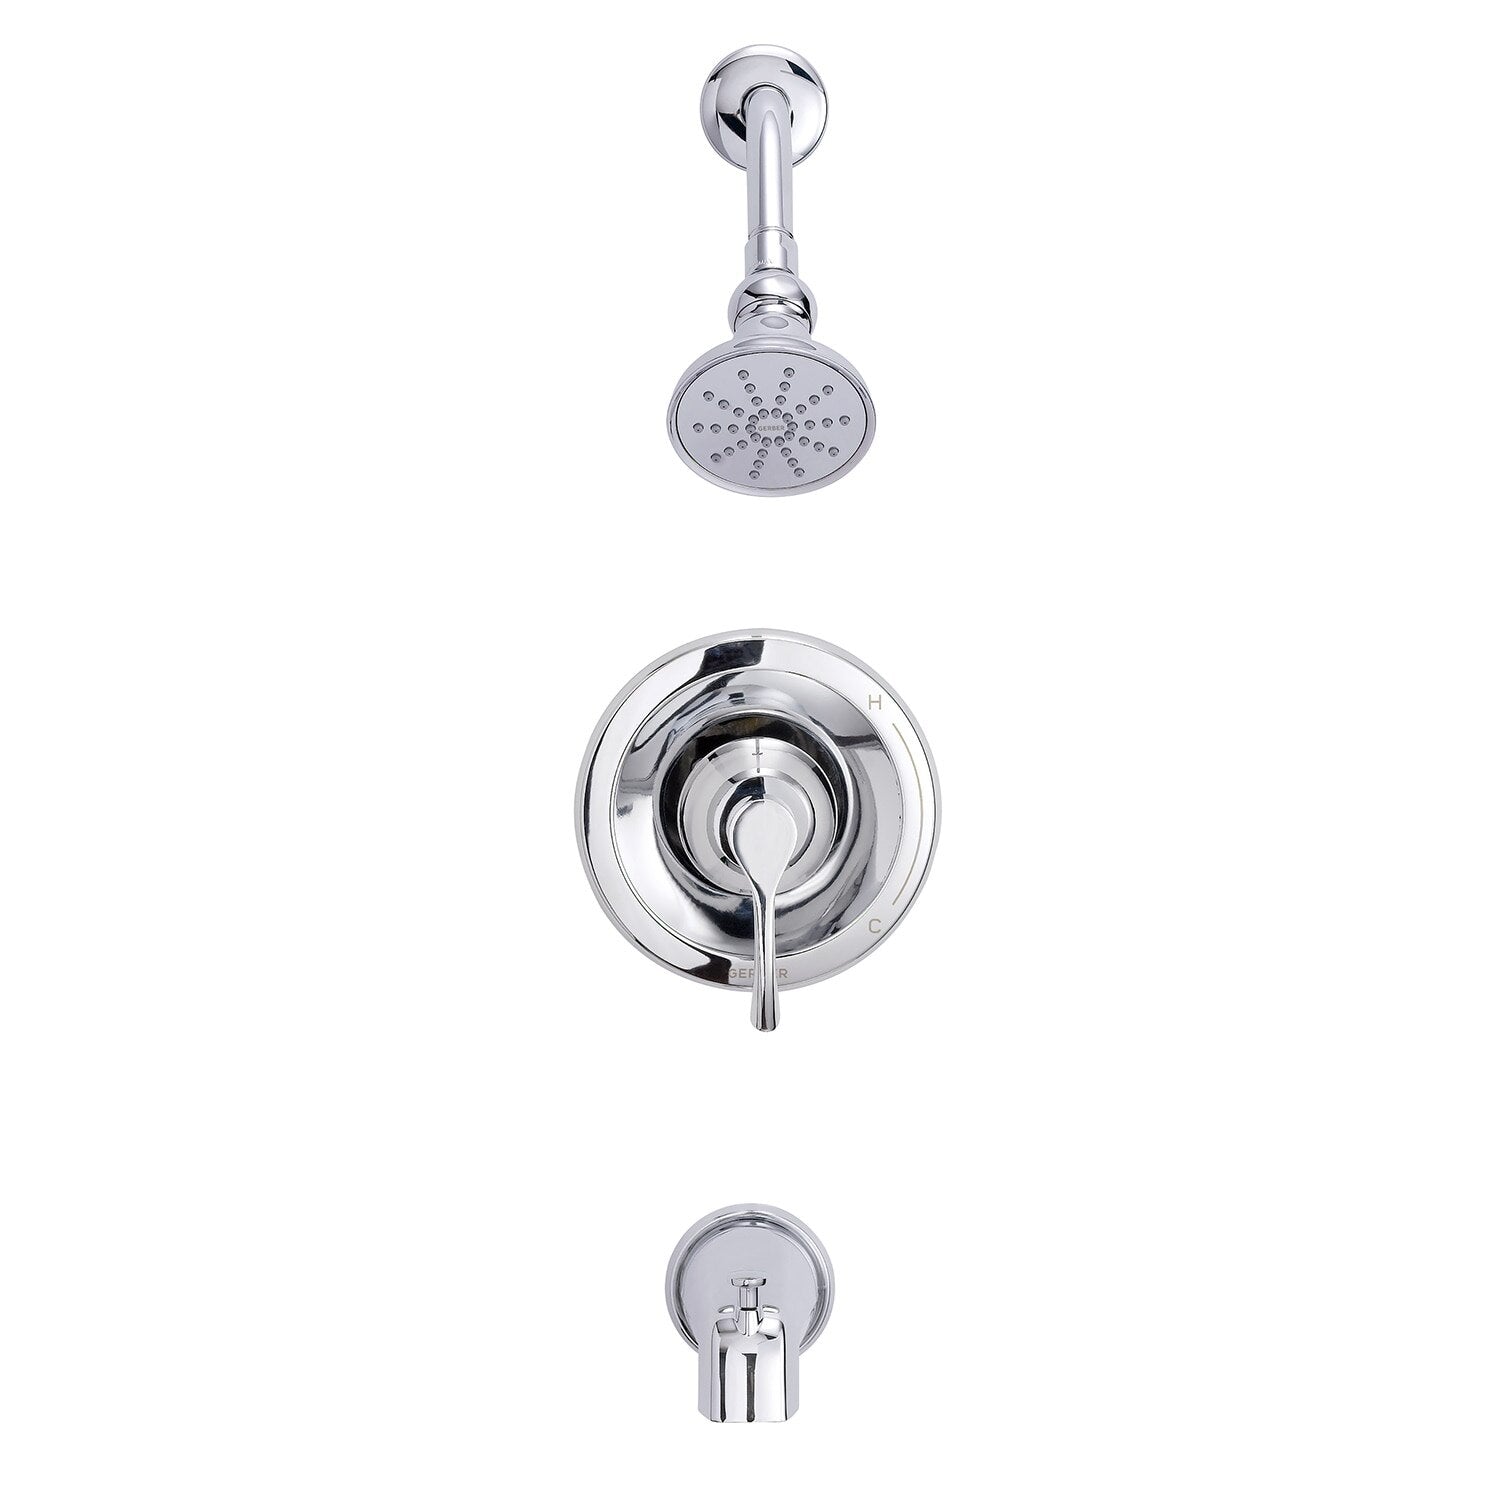 Danze by Gerber Antioch 1H Tub and Shower Trim Kit w/ Diverter on Spout and Treysta Cartridge 1.75gpm